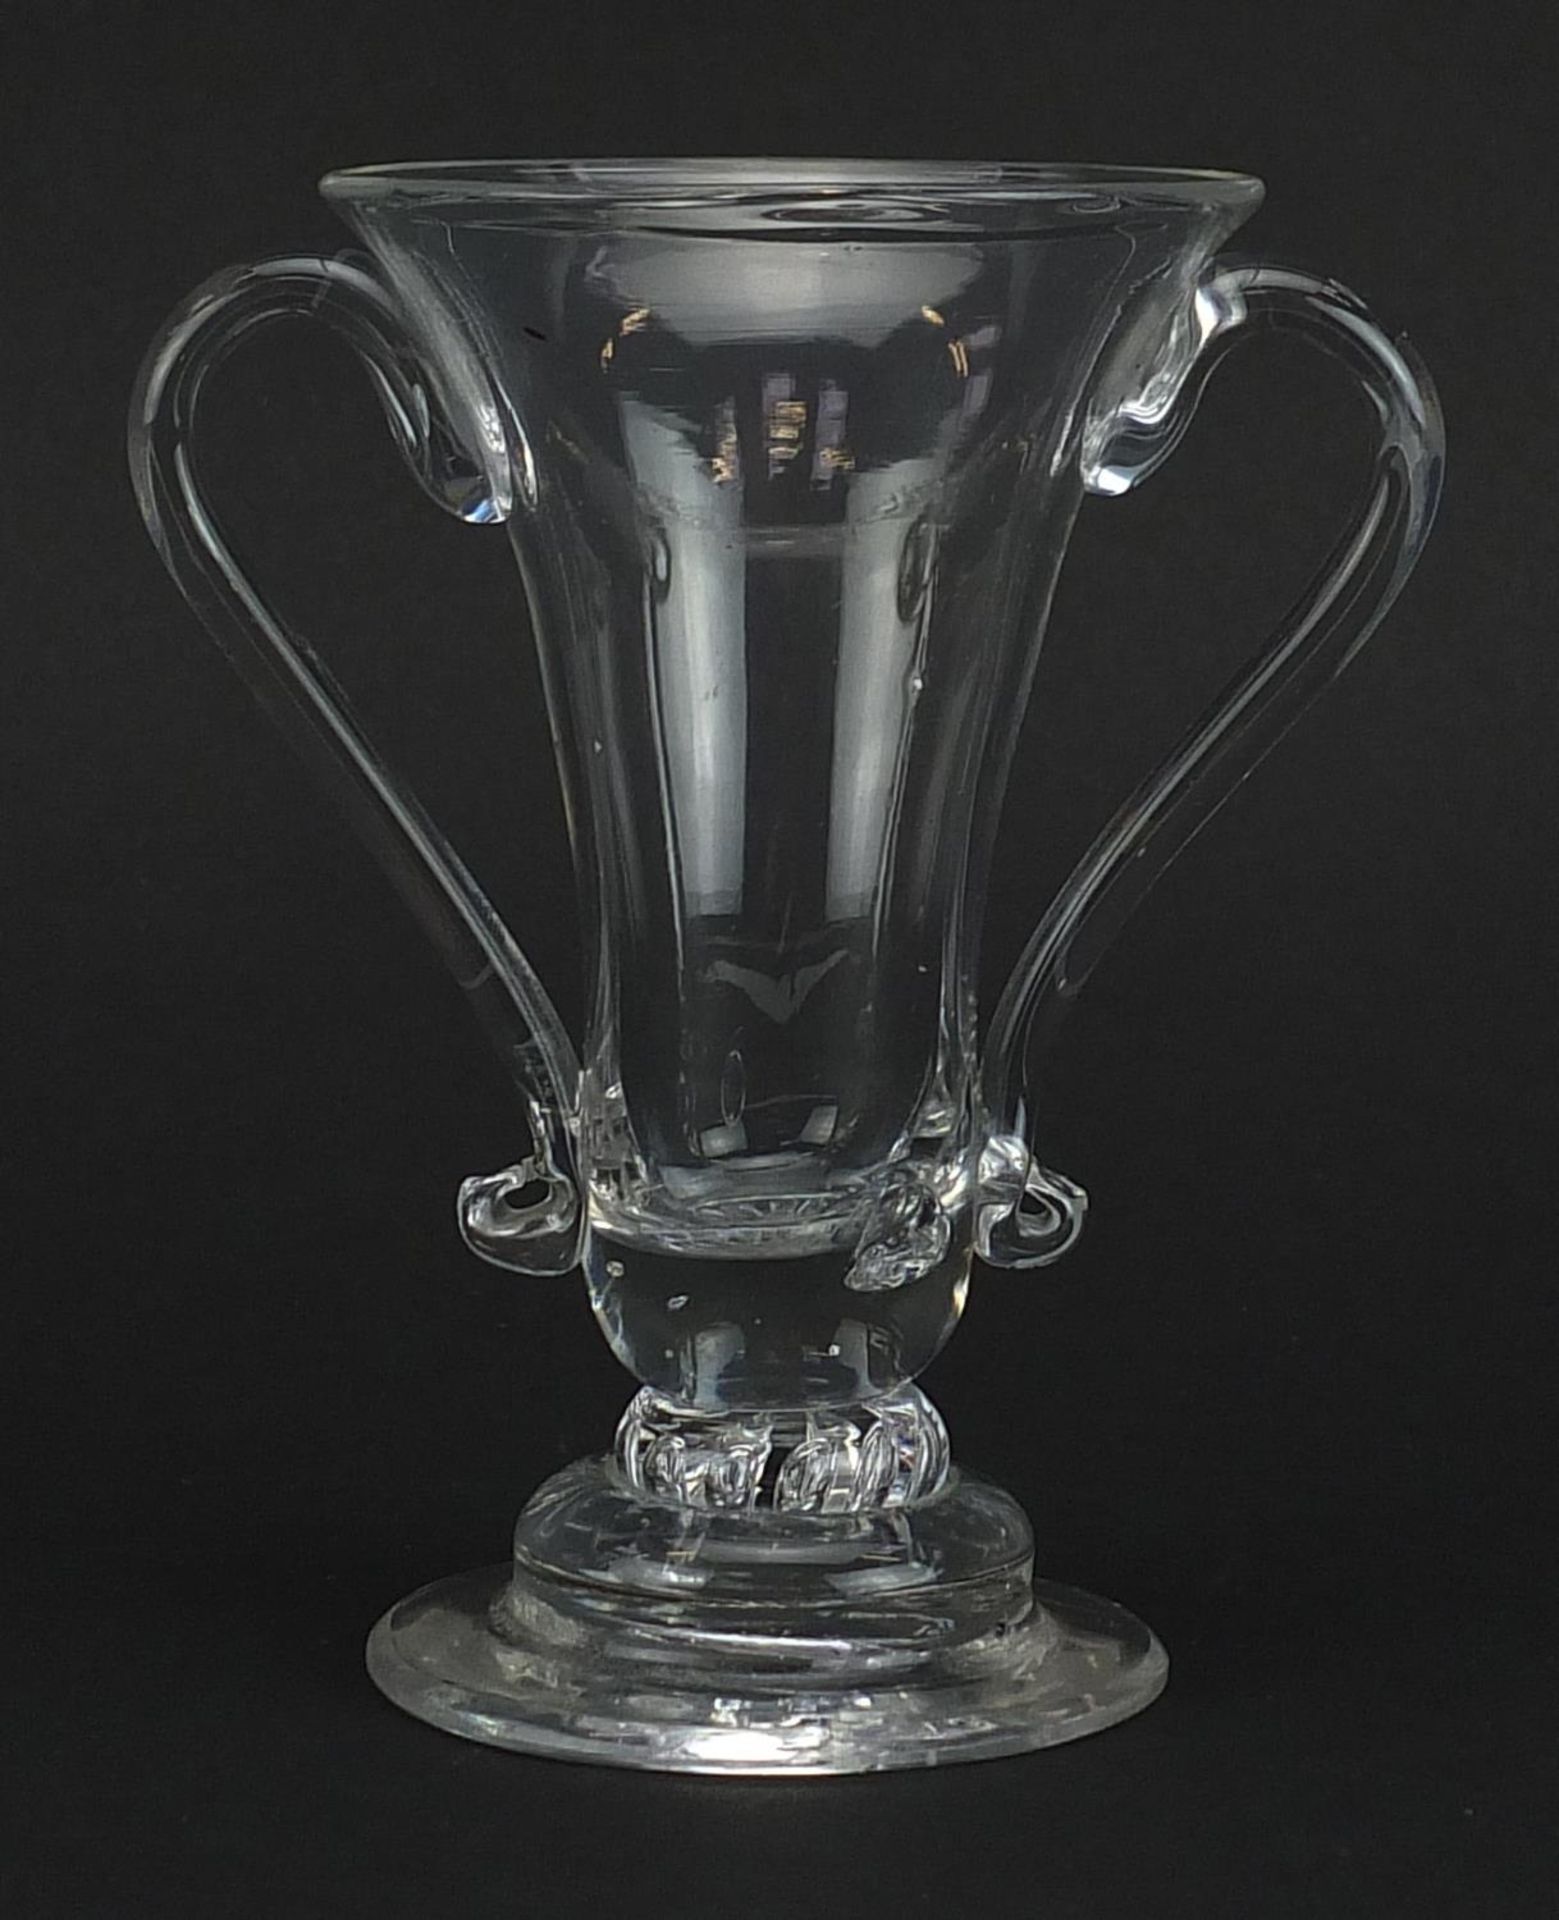 18th century jelly glass with twin handles, 11.5cm high